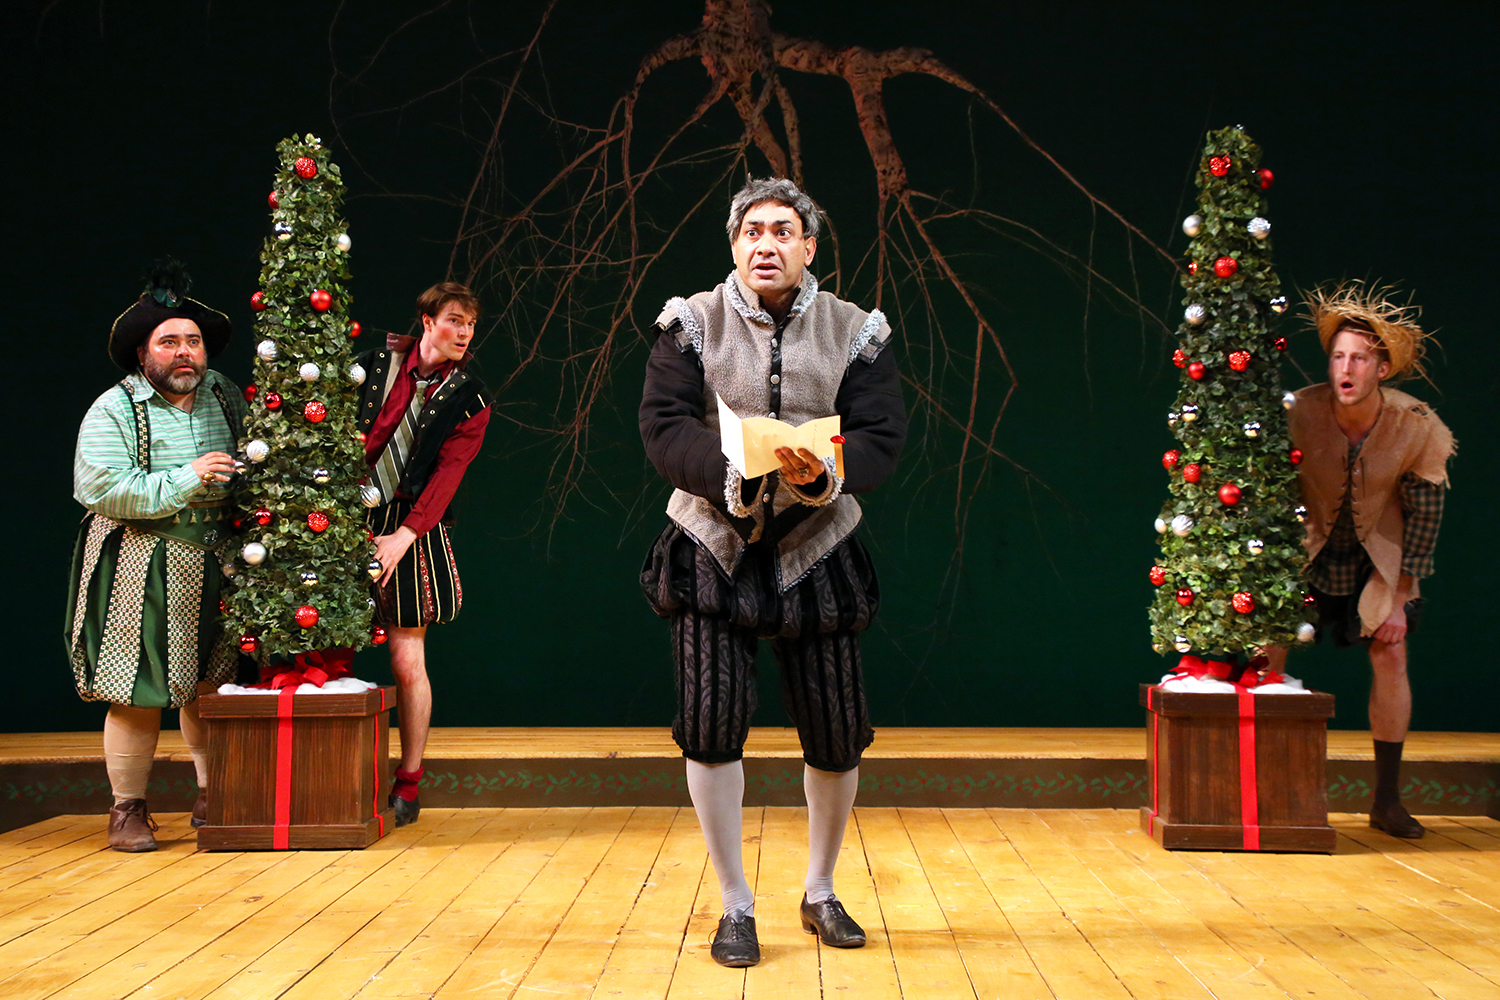 Andrew Ramcharan Guilarte, center, as Malvolio, along with, from left, Richard Ruiz ’88 MFA, Mark Blashford MFA candidate in puppetry, ,and Curtis Longfellow, MFA candidate in acting, in Connecticut Repertory Theatre’s production of 'Twelfth Night,' by William Shakespeare. (Gerry Goodstein for UConn)